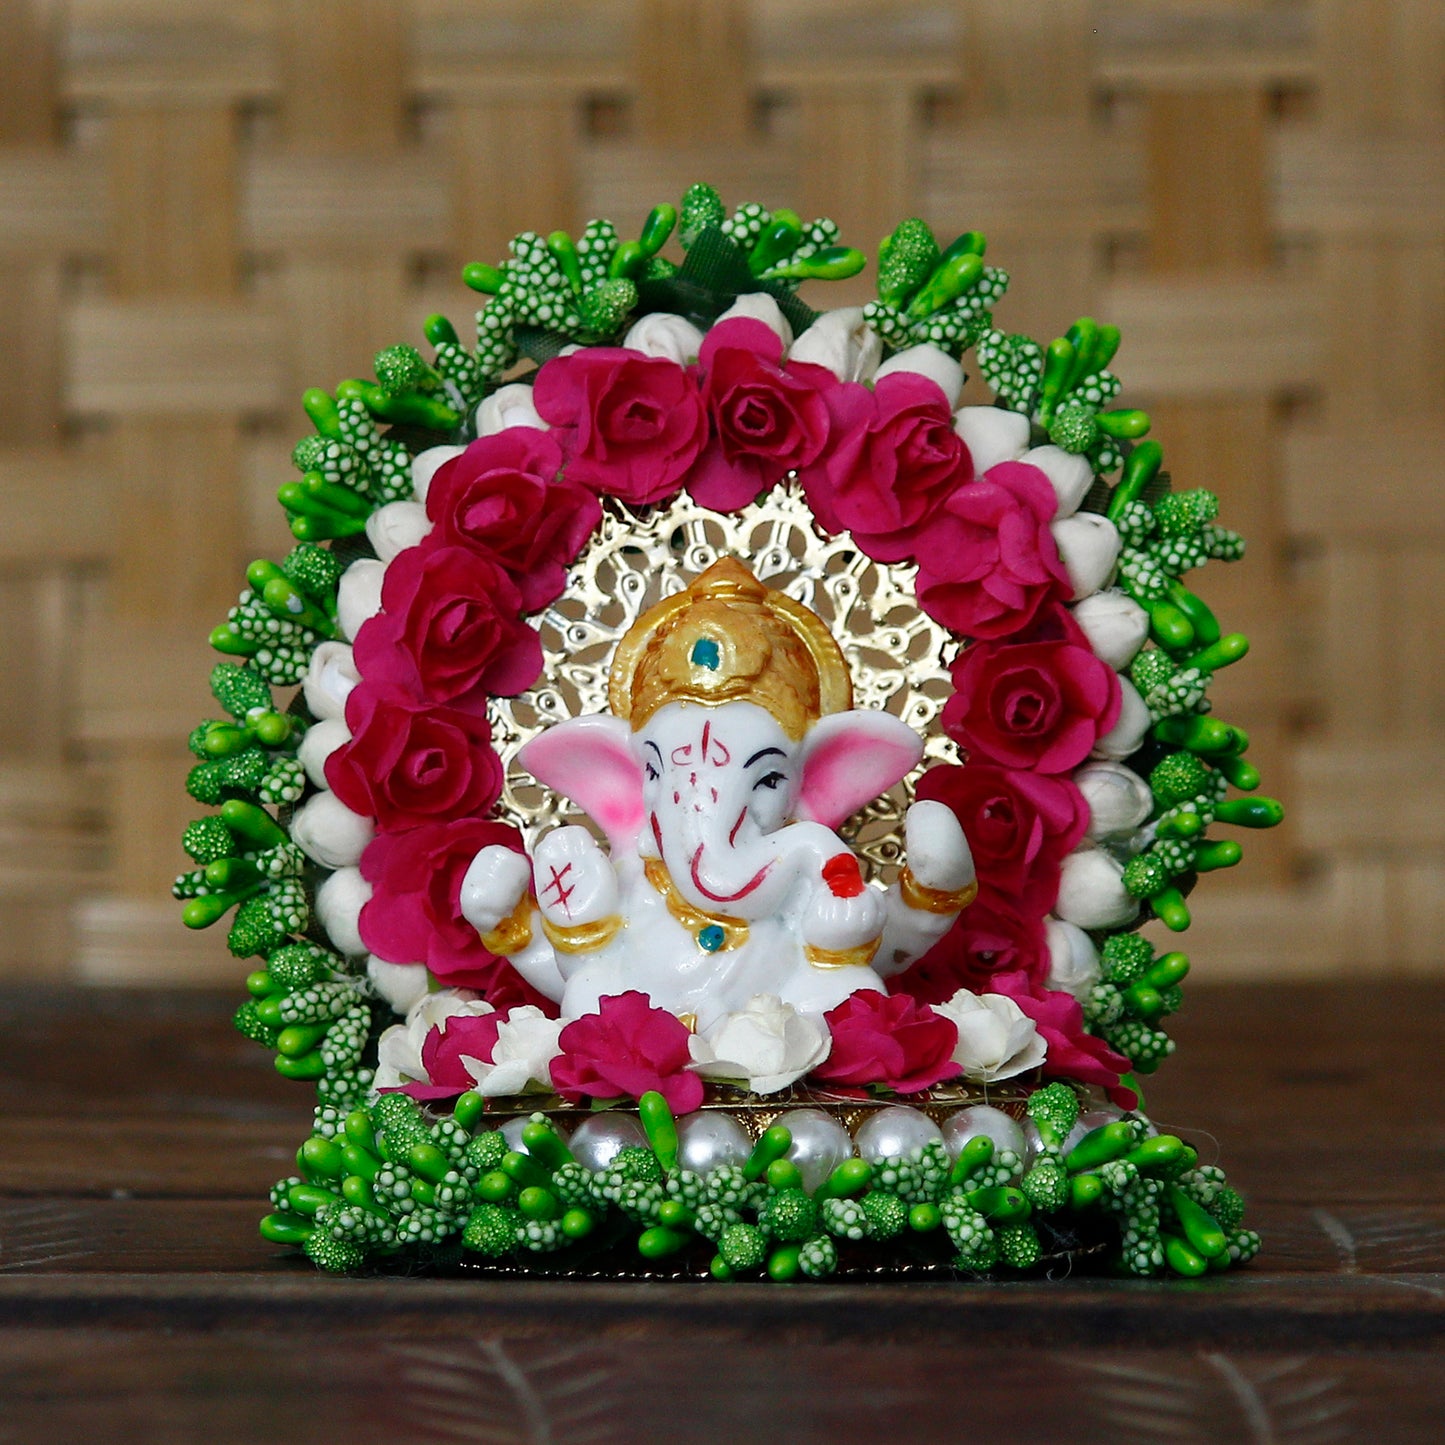 Lord Ganesha Idol on Decorative Handcrafted Green Floral Plate for Home and Car